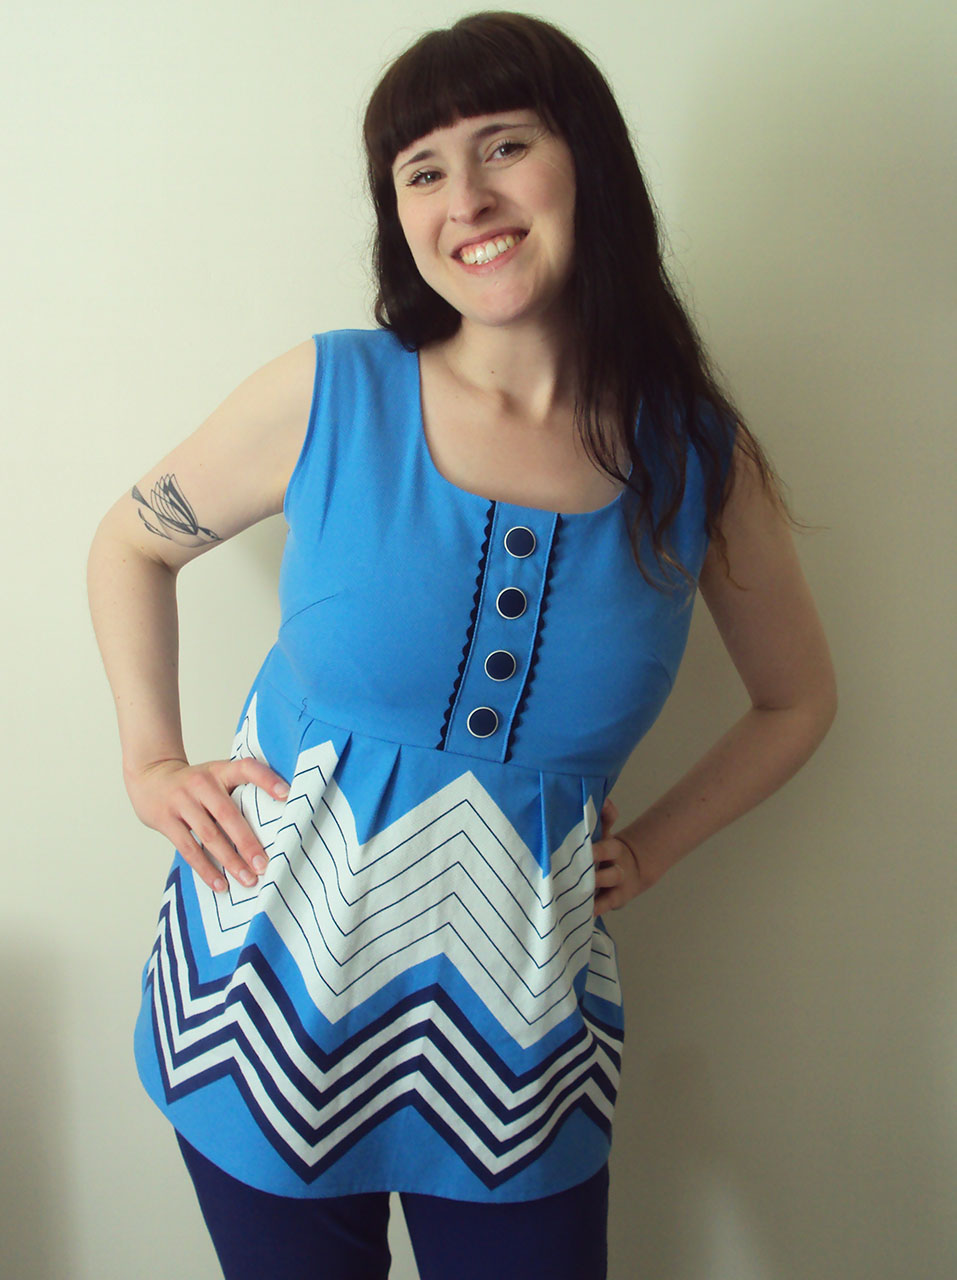 'So, Zo...': If Modcloth did Maternity...